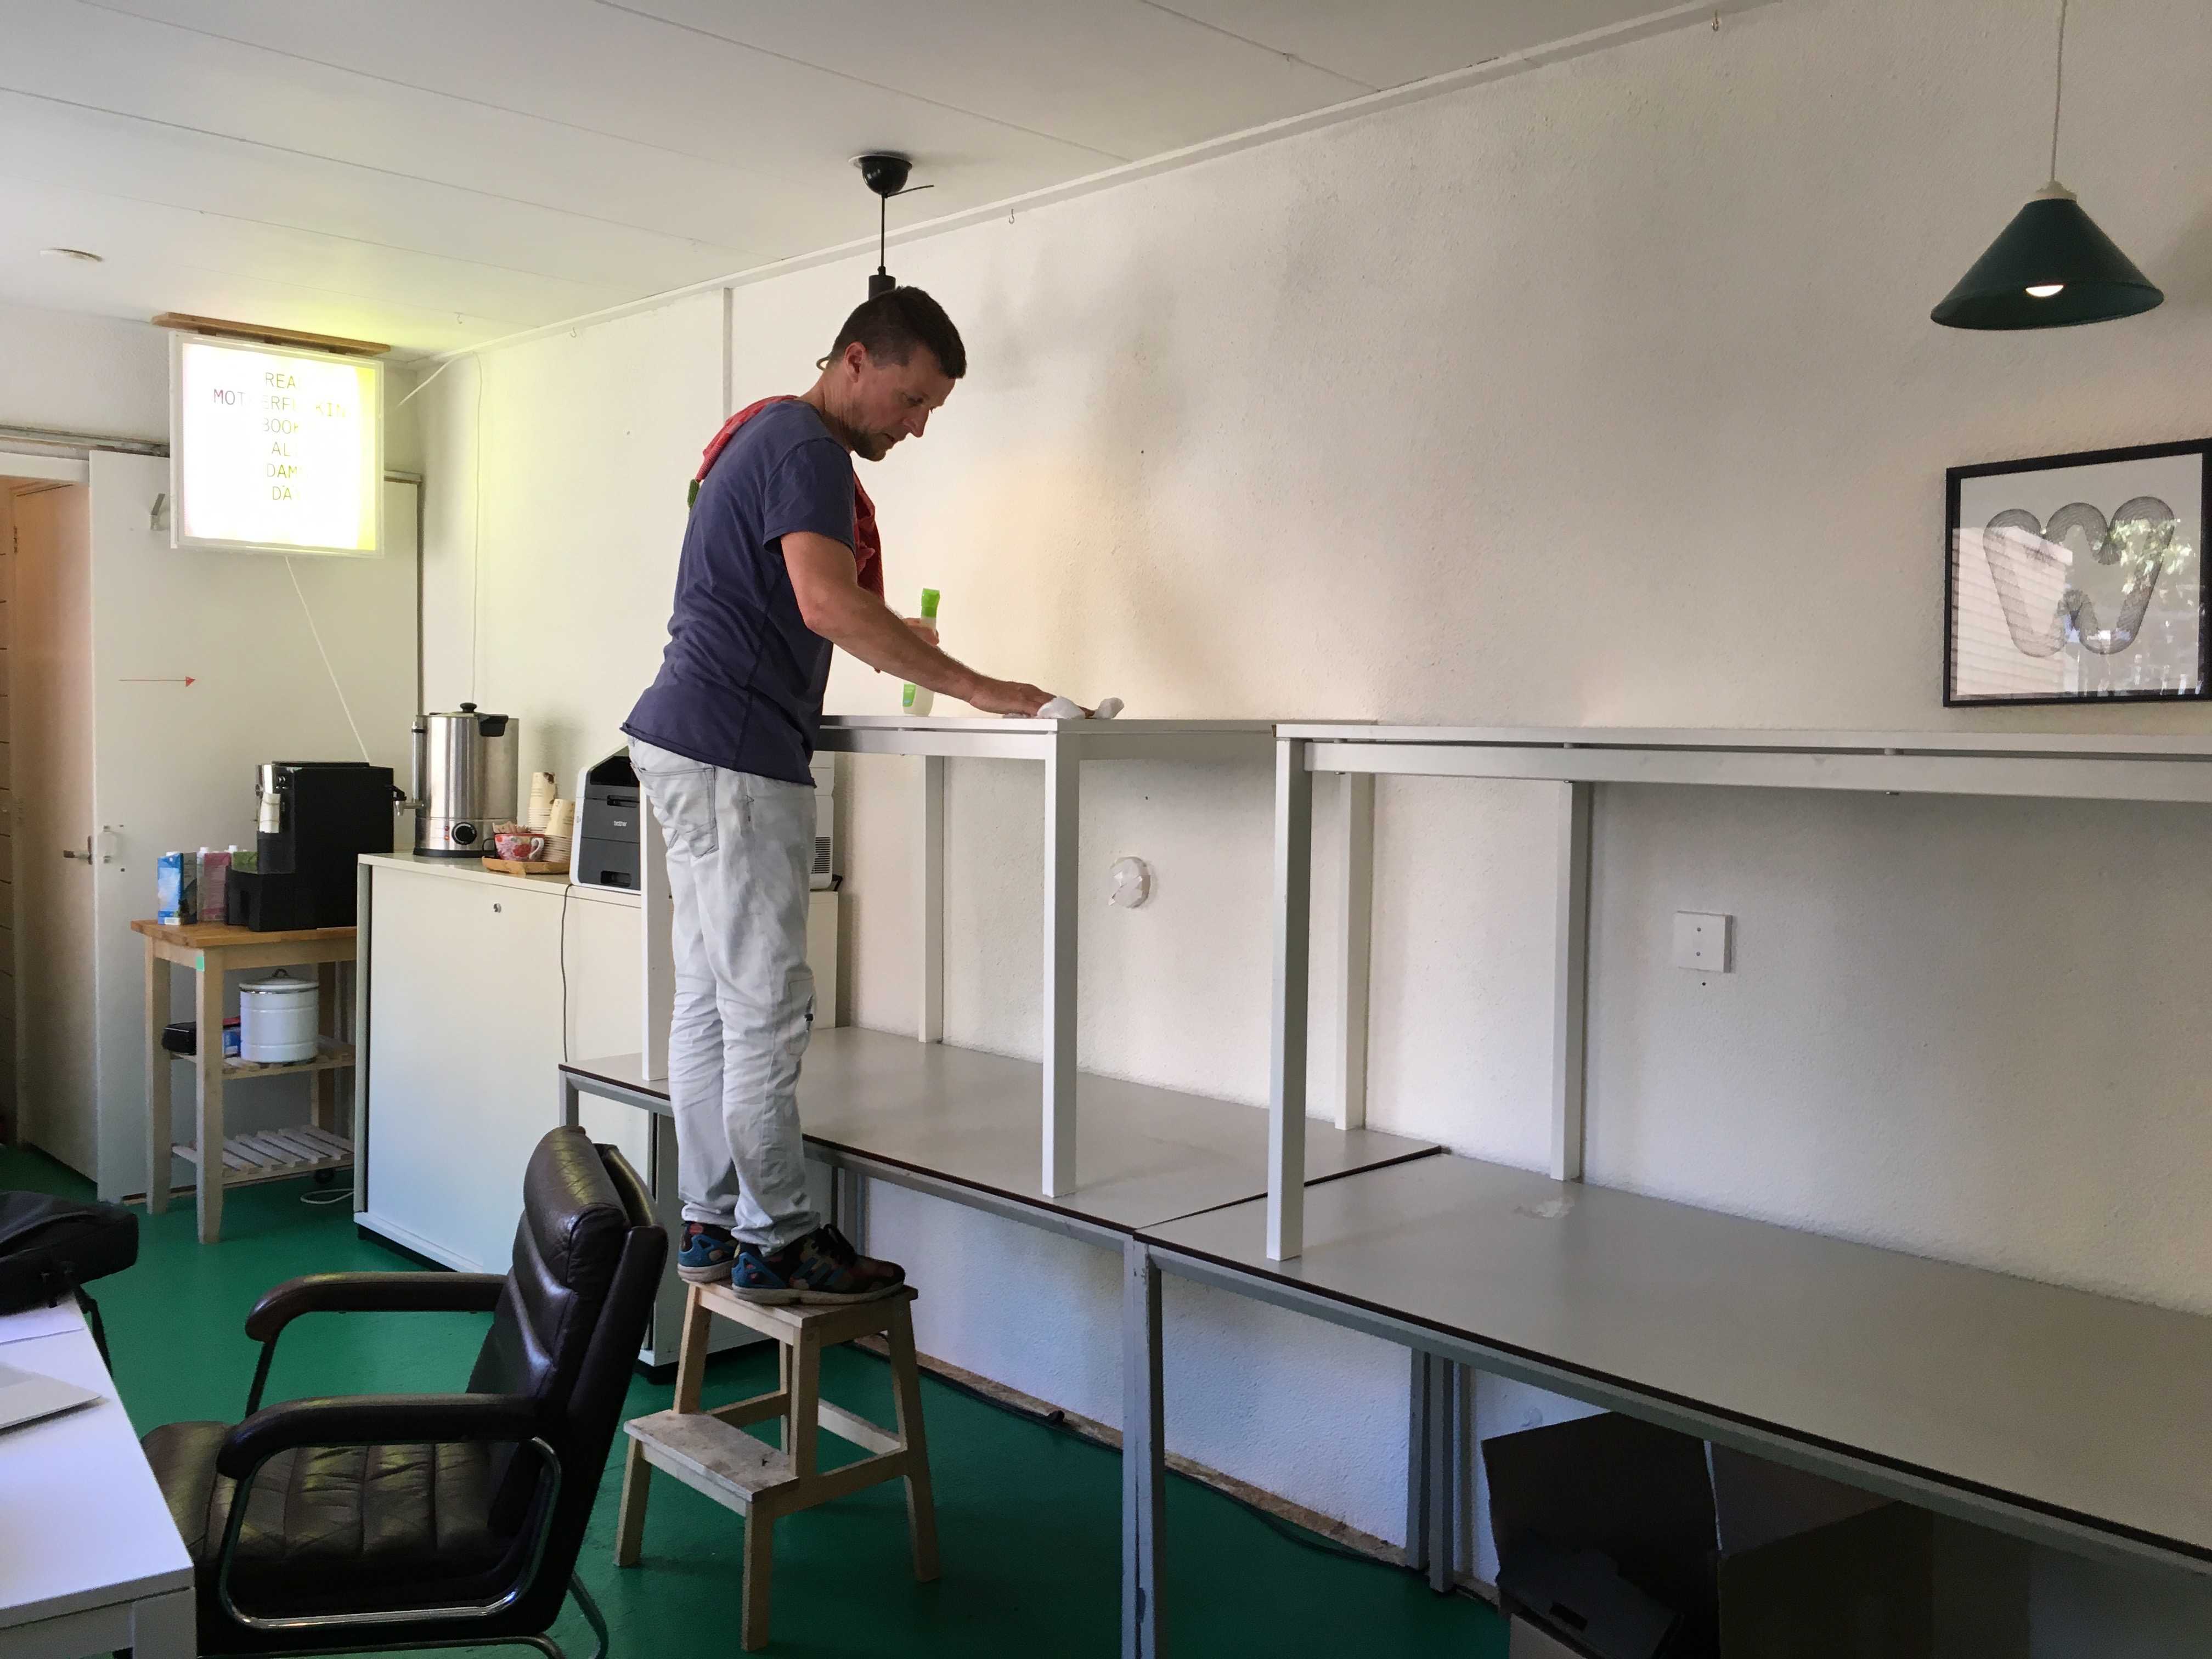 DAI Introductionweek October 2018: Monday 15 October ~ Henry Alles after DAI week cleaning up of WALTER tables  (Photo: Jacq van der Spek)